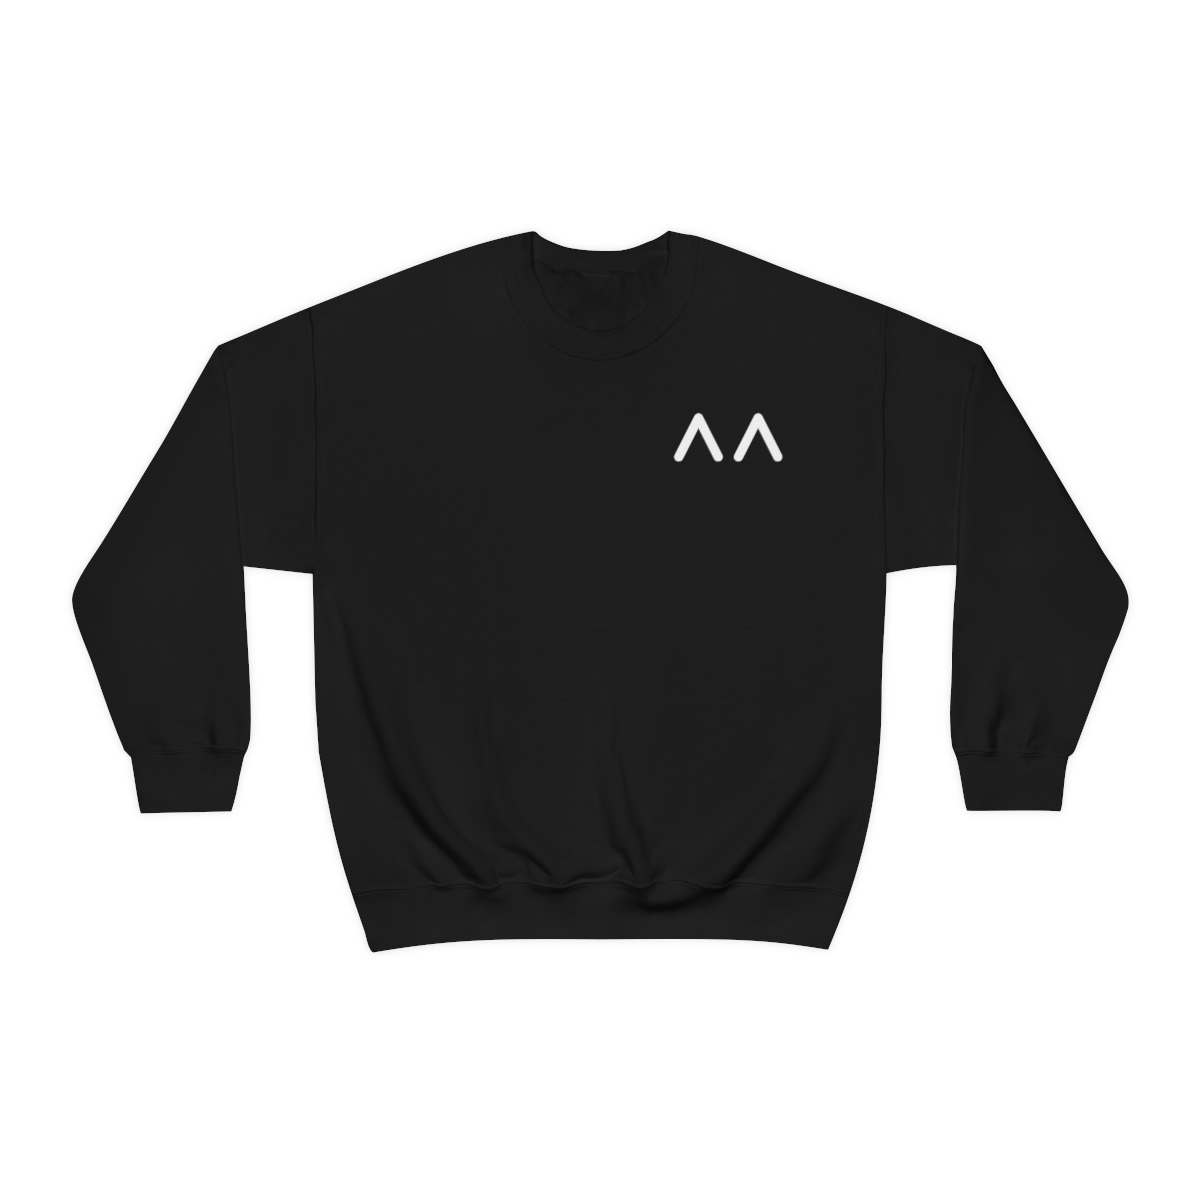 Front view of a black sweatshirt with stylized "AA" over the left breast denoting sickle cell trait status.